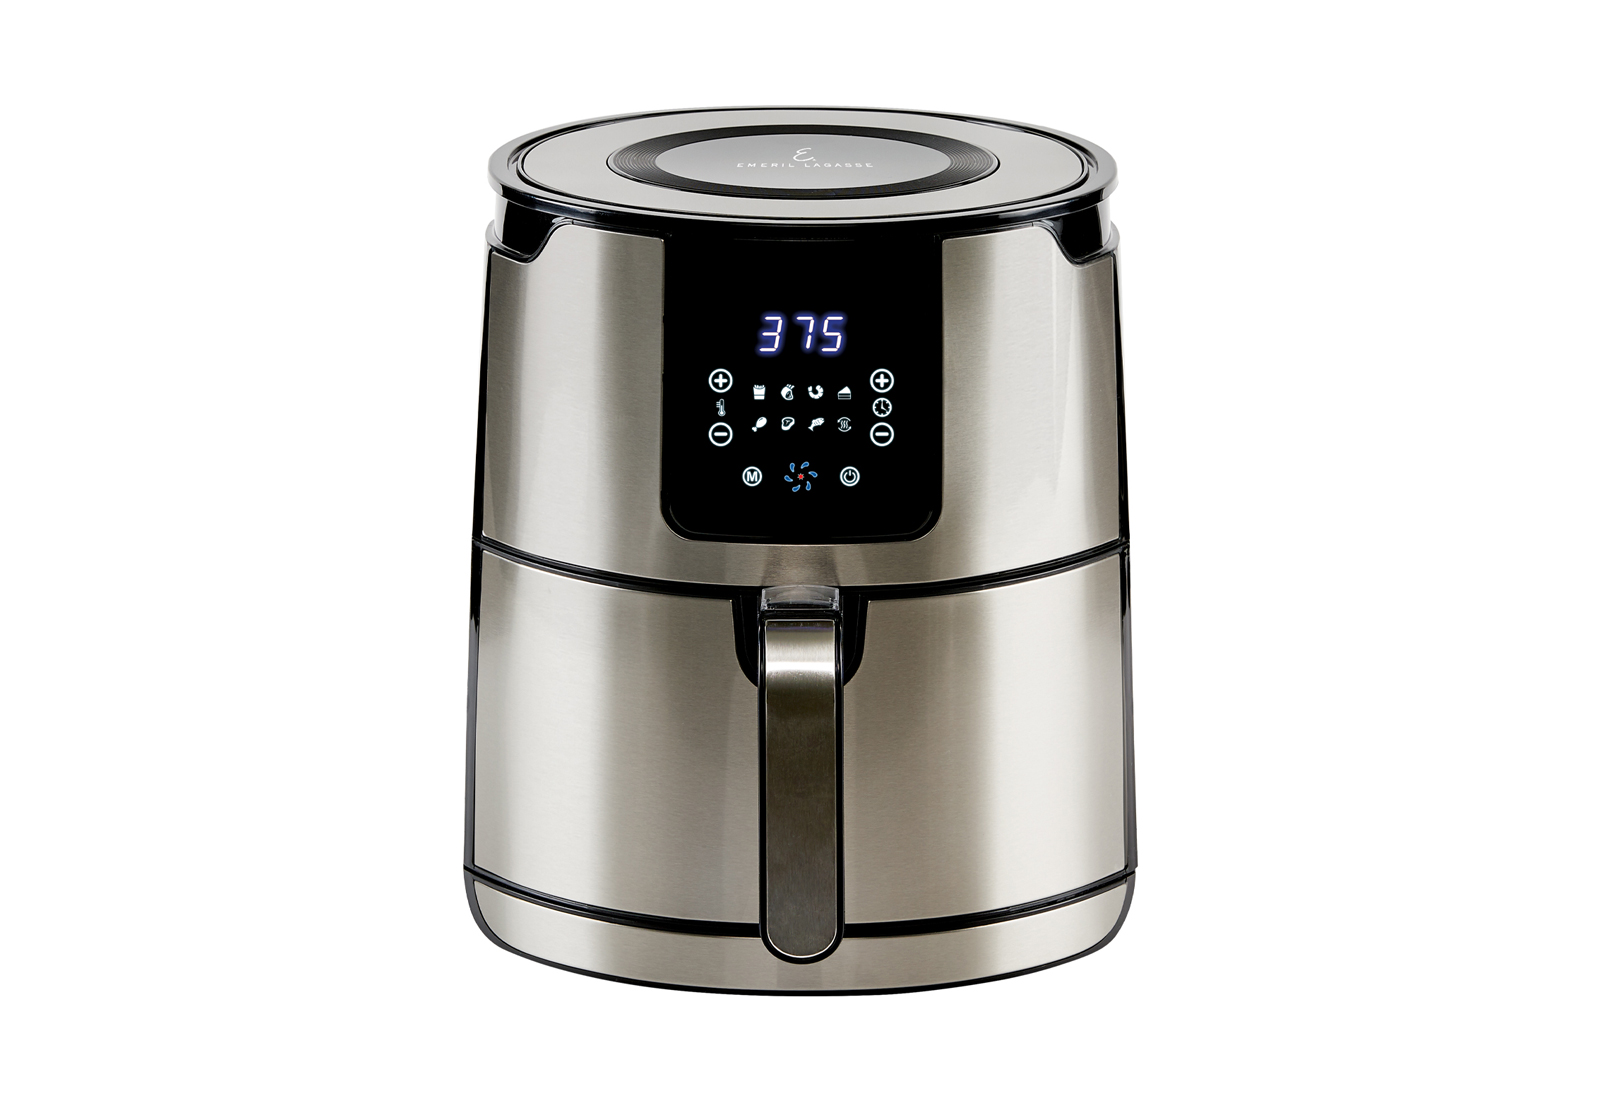 Emeril Lagasse Airfryer Product Image